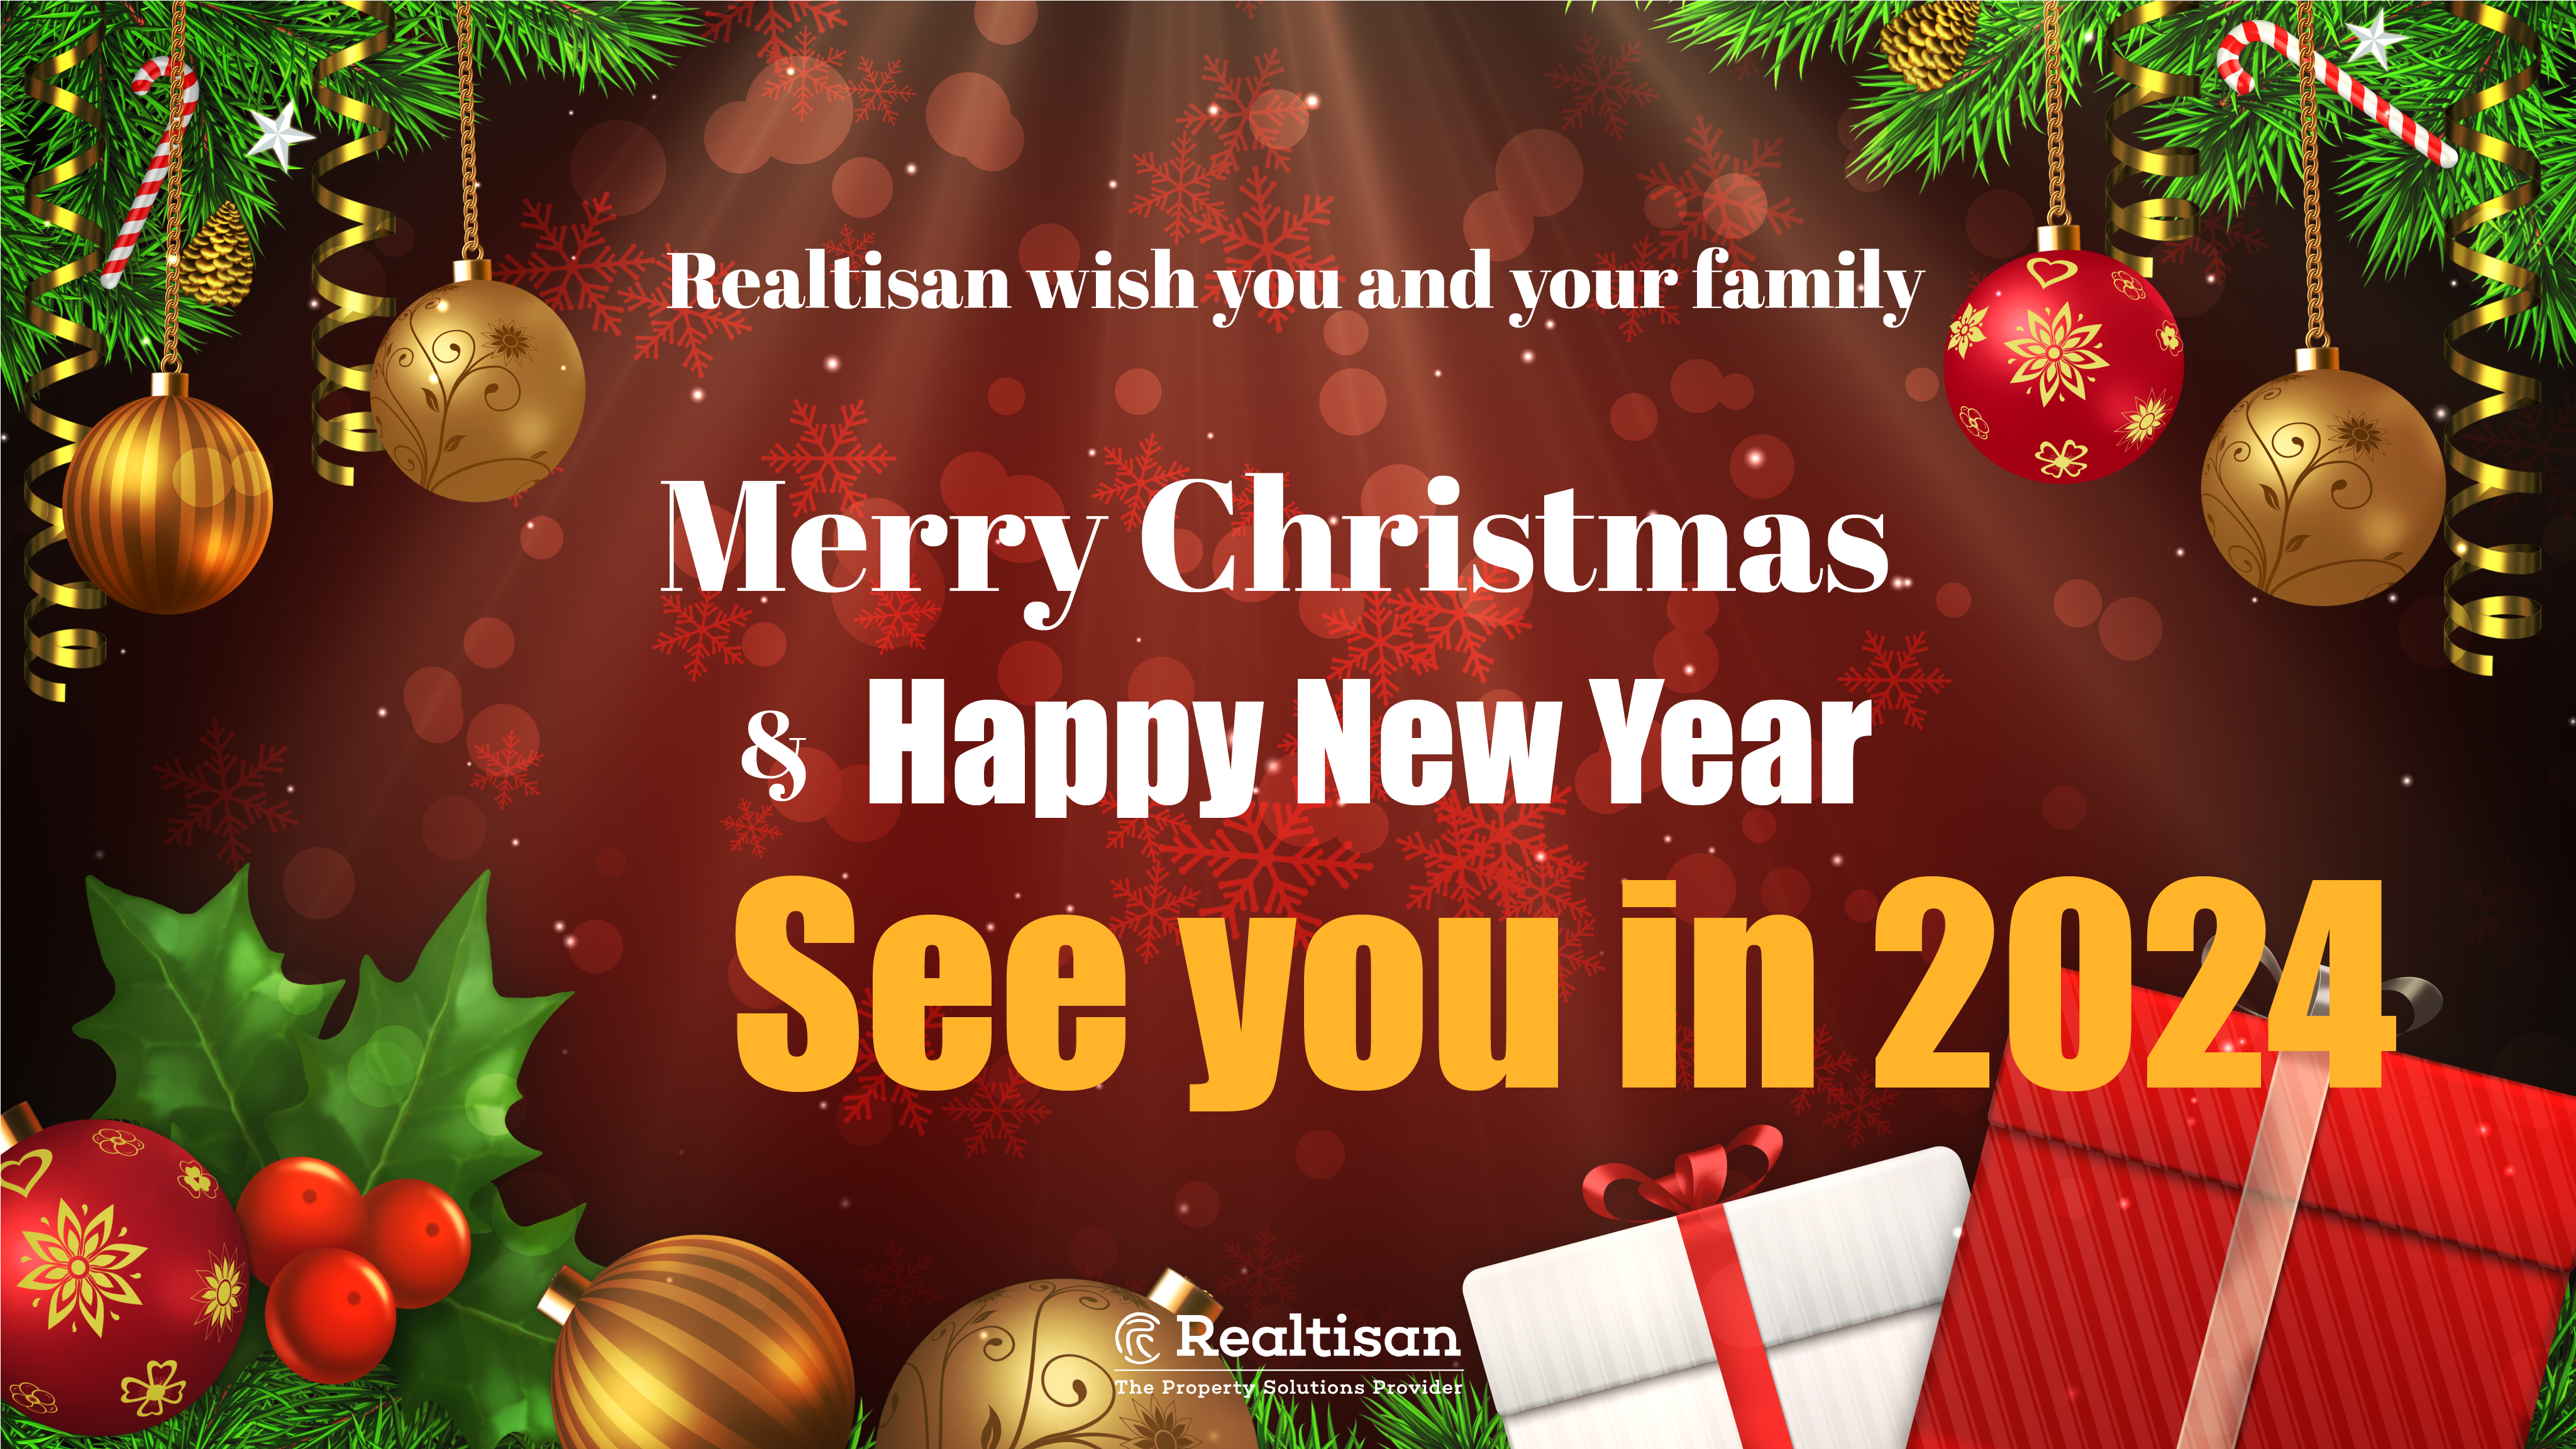 Realtisan wish you and your family Merry Christmas and Happy 2024